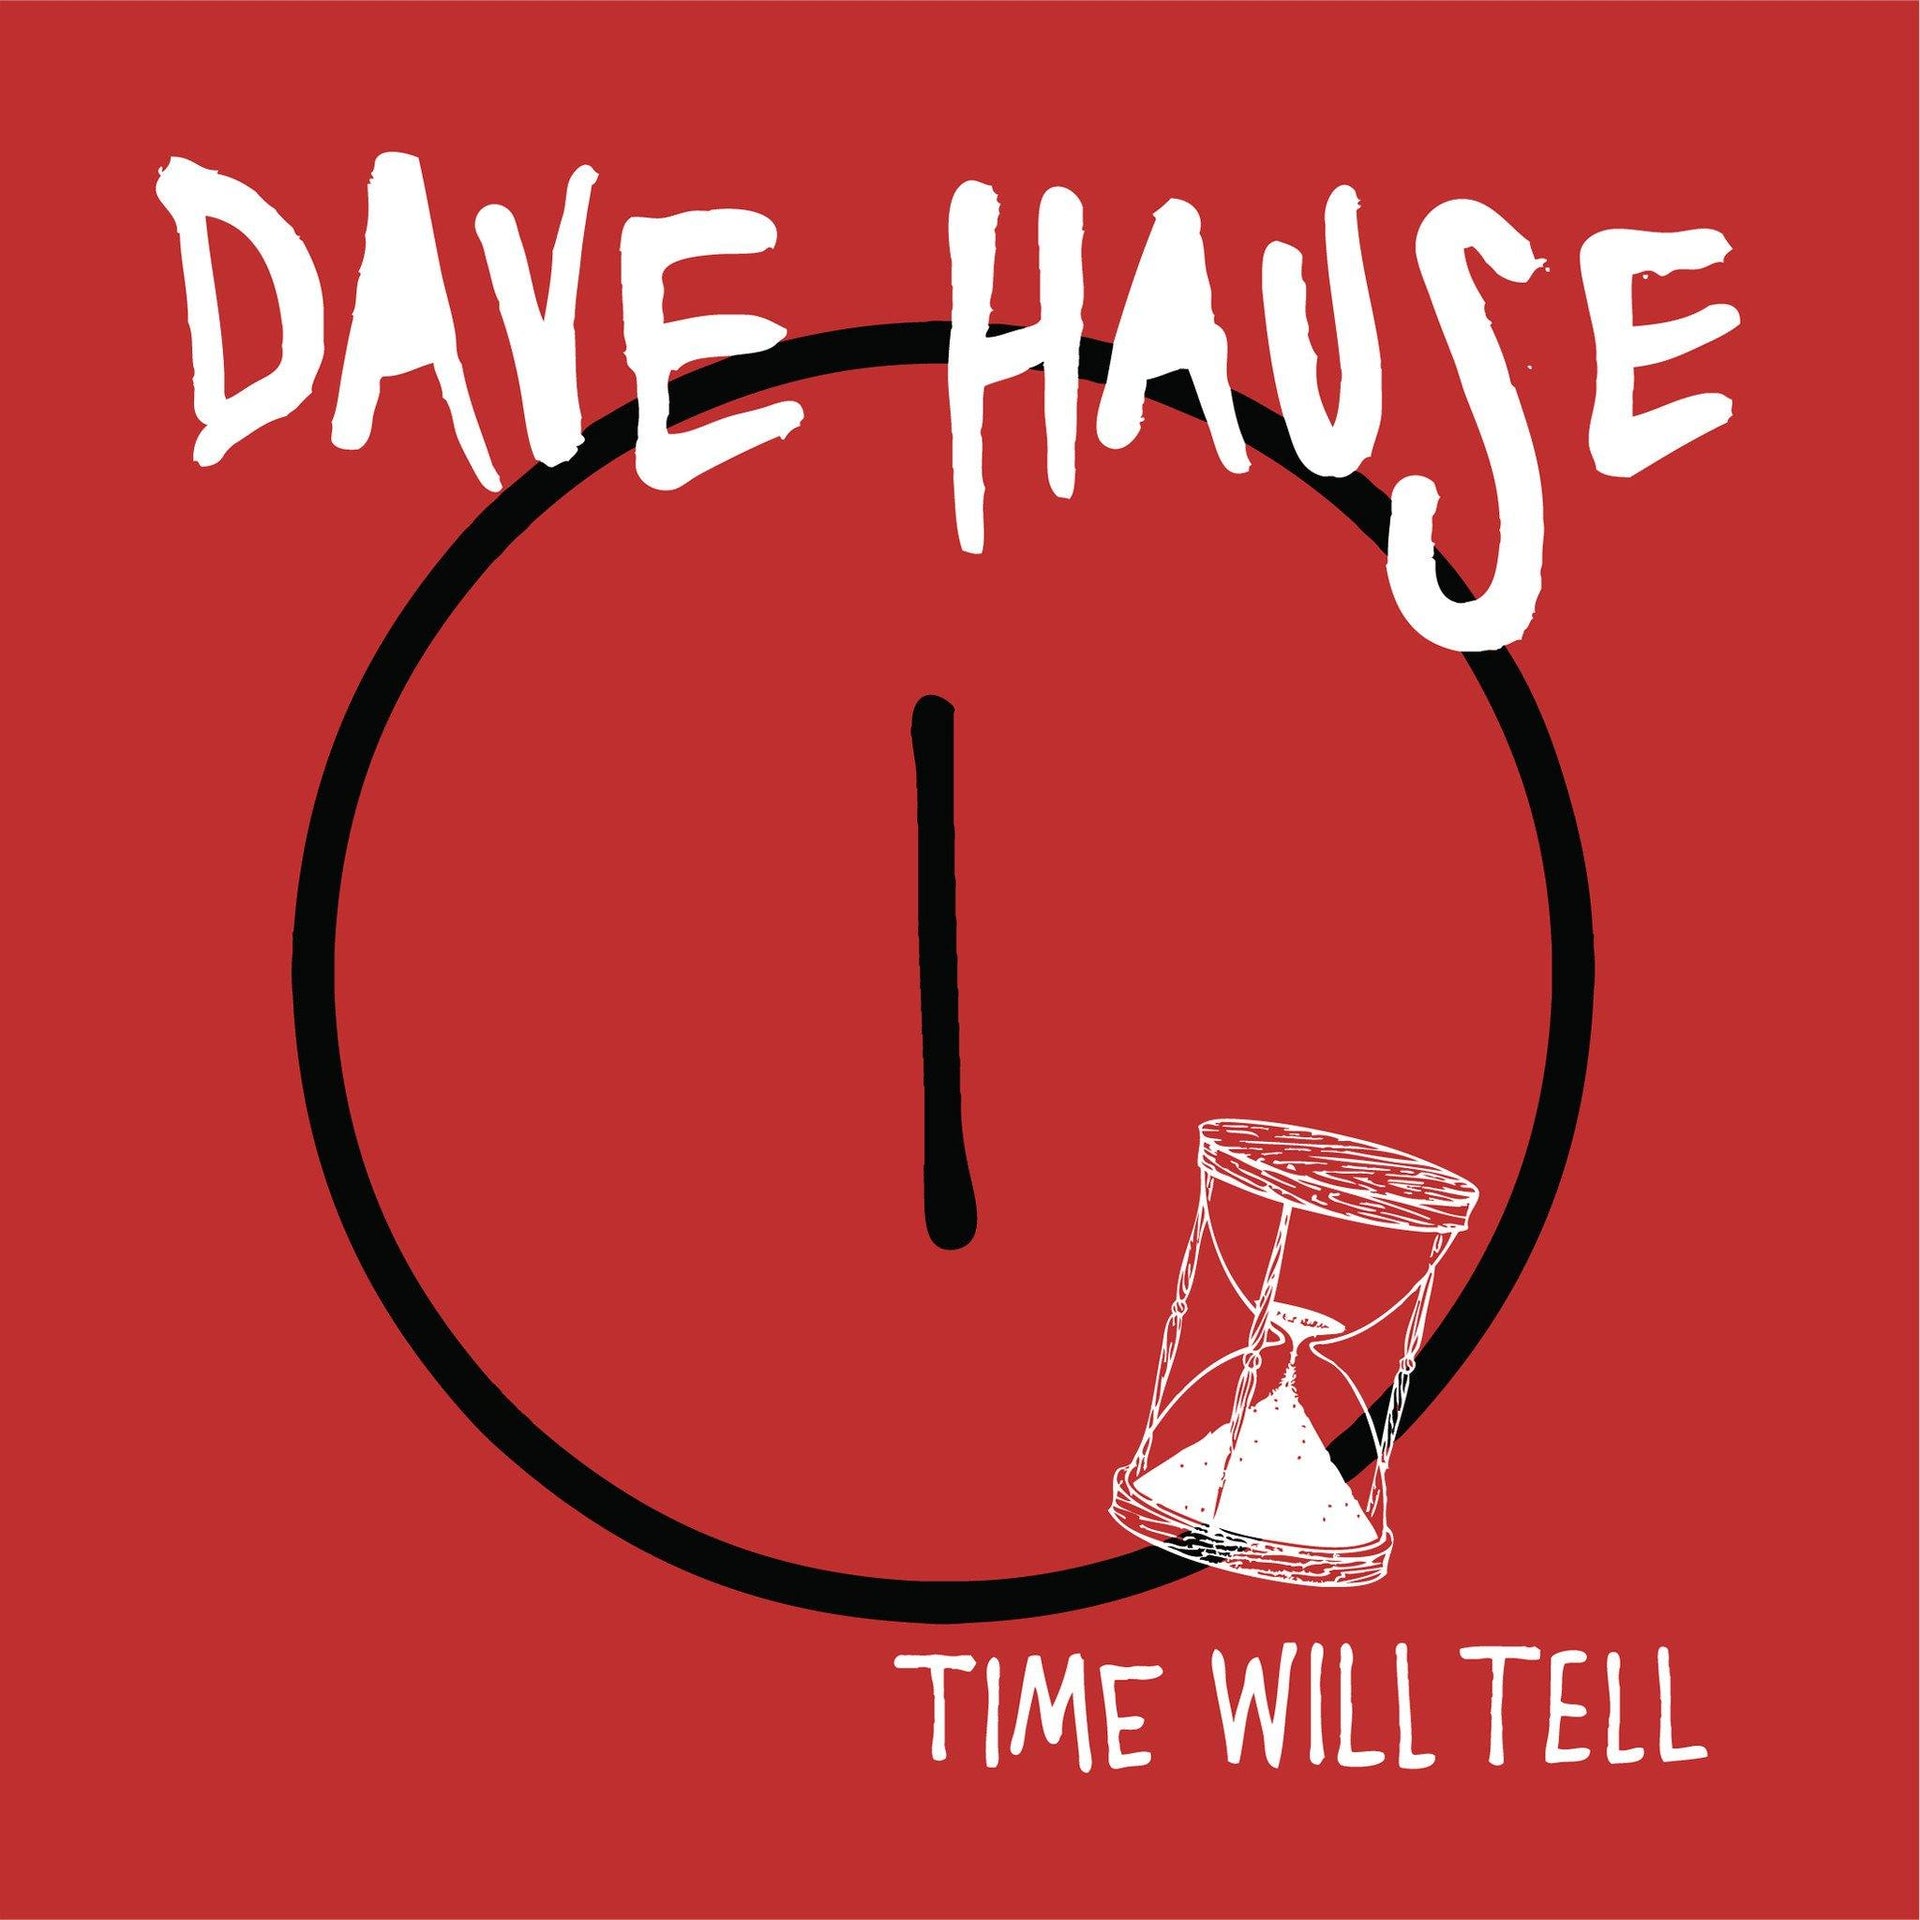 Buy – Dave Hause "Time Will Tell" 7" – Band & Music Merch – Cold Cuts Merch